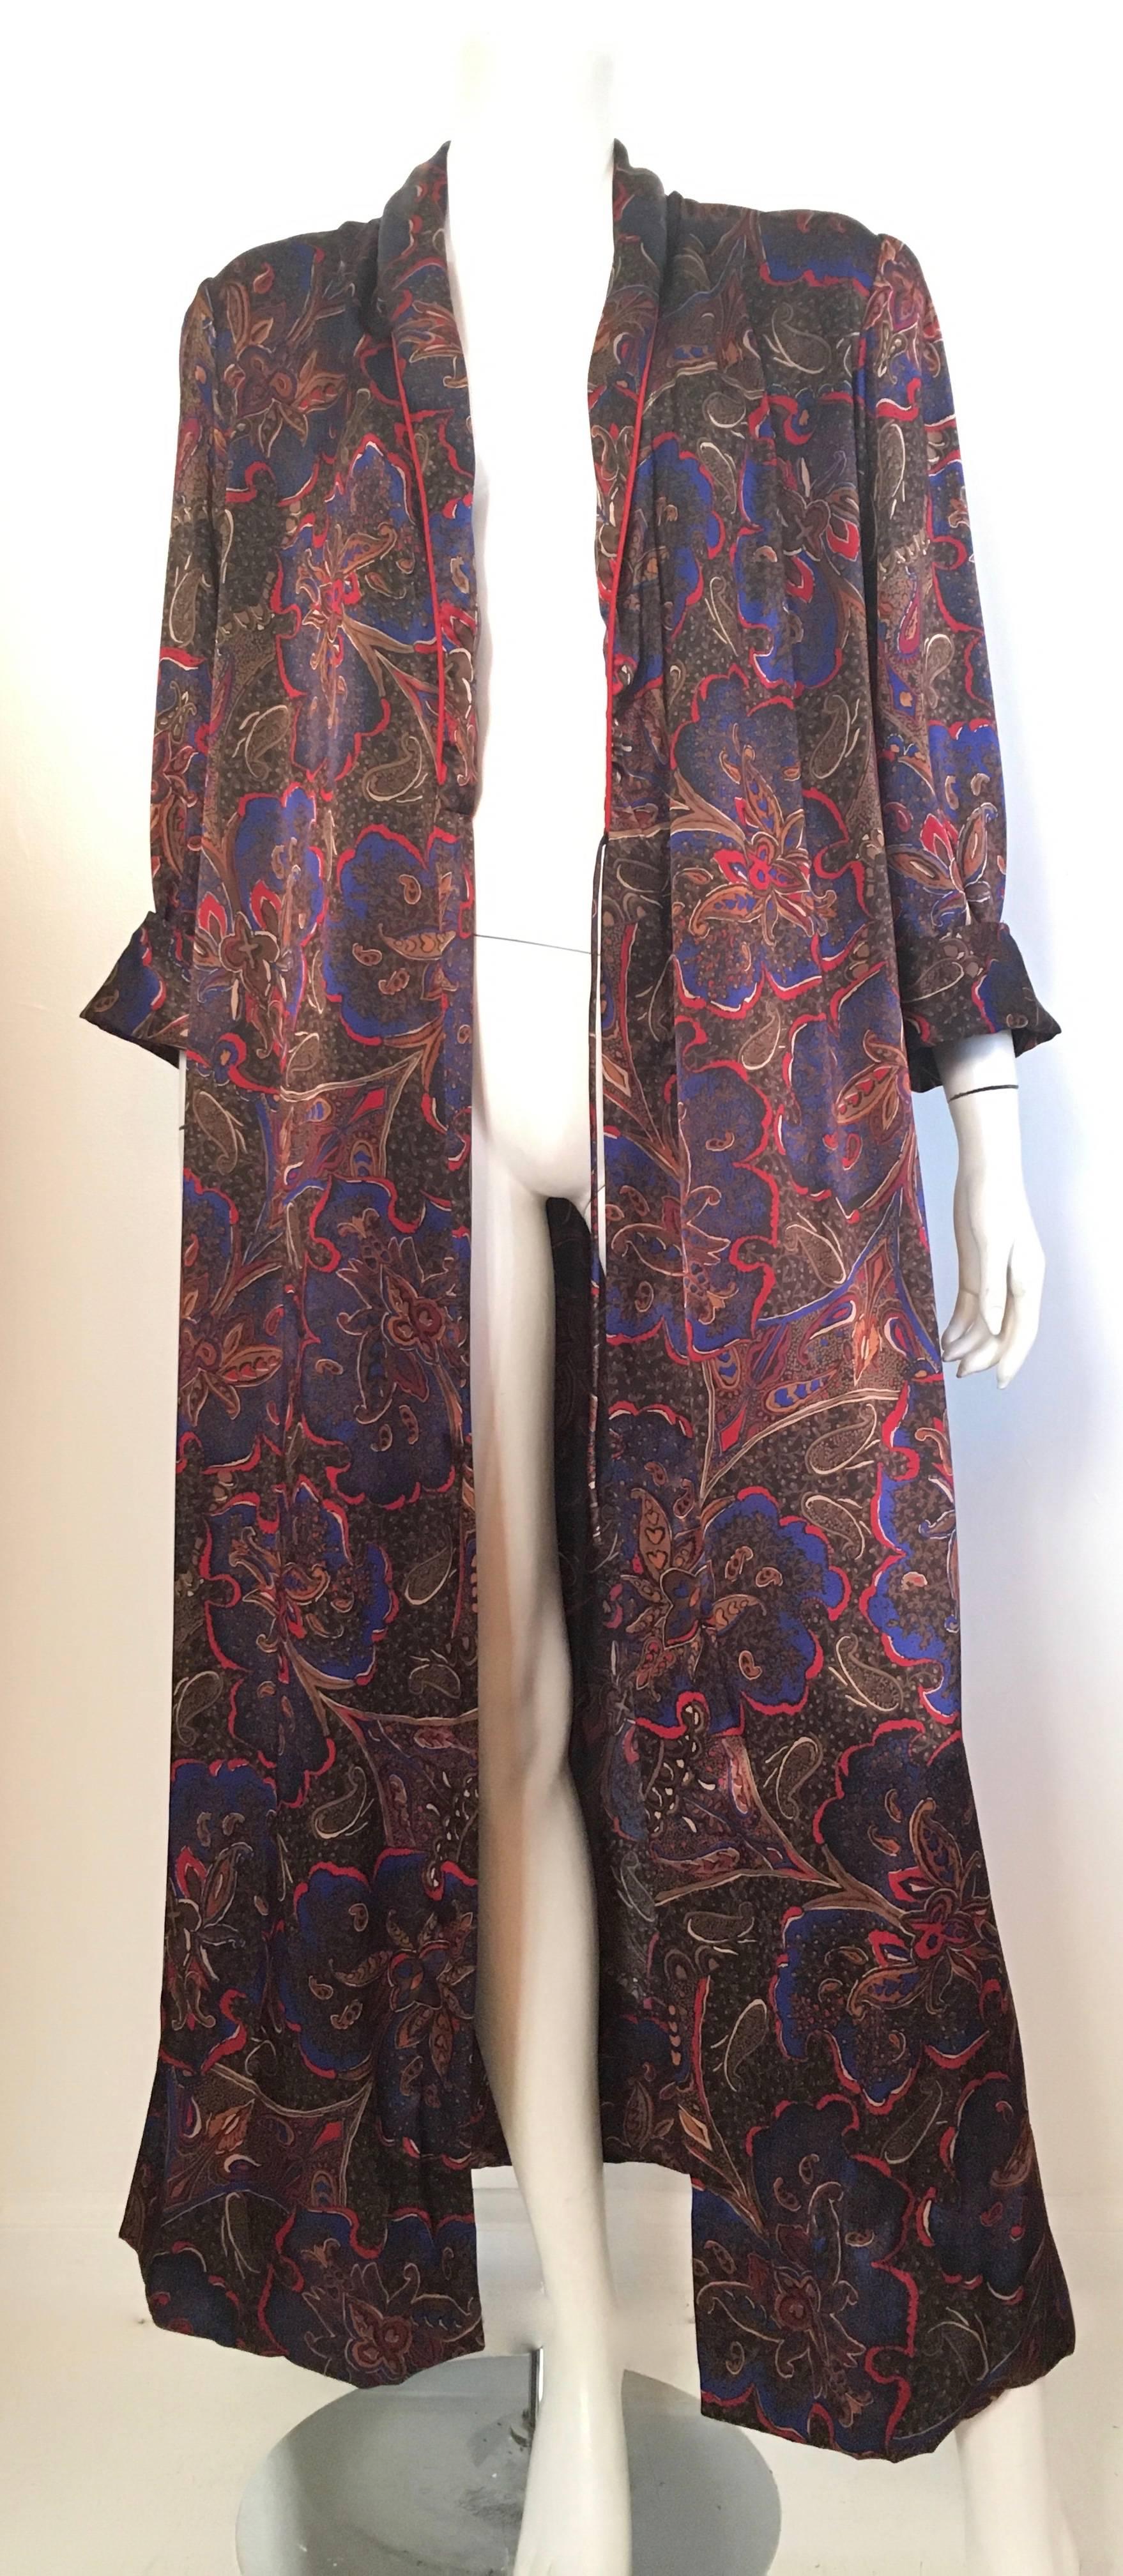 Bill Blass for Neiman Marcus 1980s Paisley Wrap Dress with Pockets Size Medium. For Sale 4